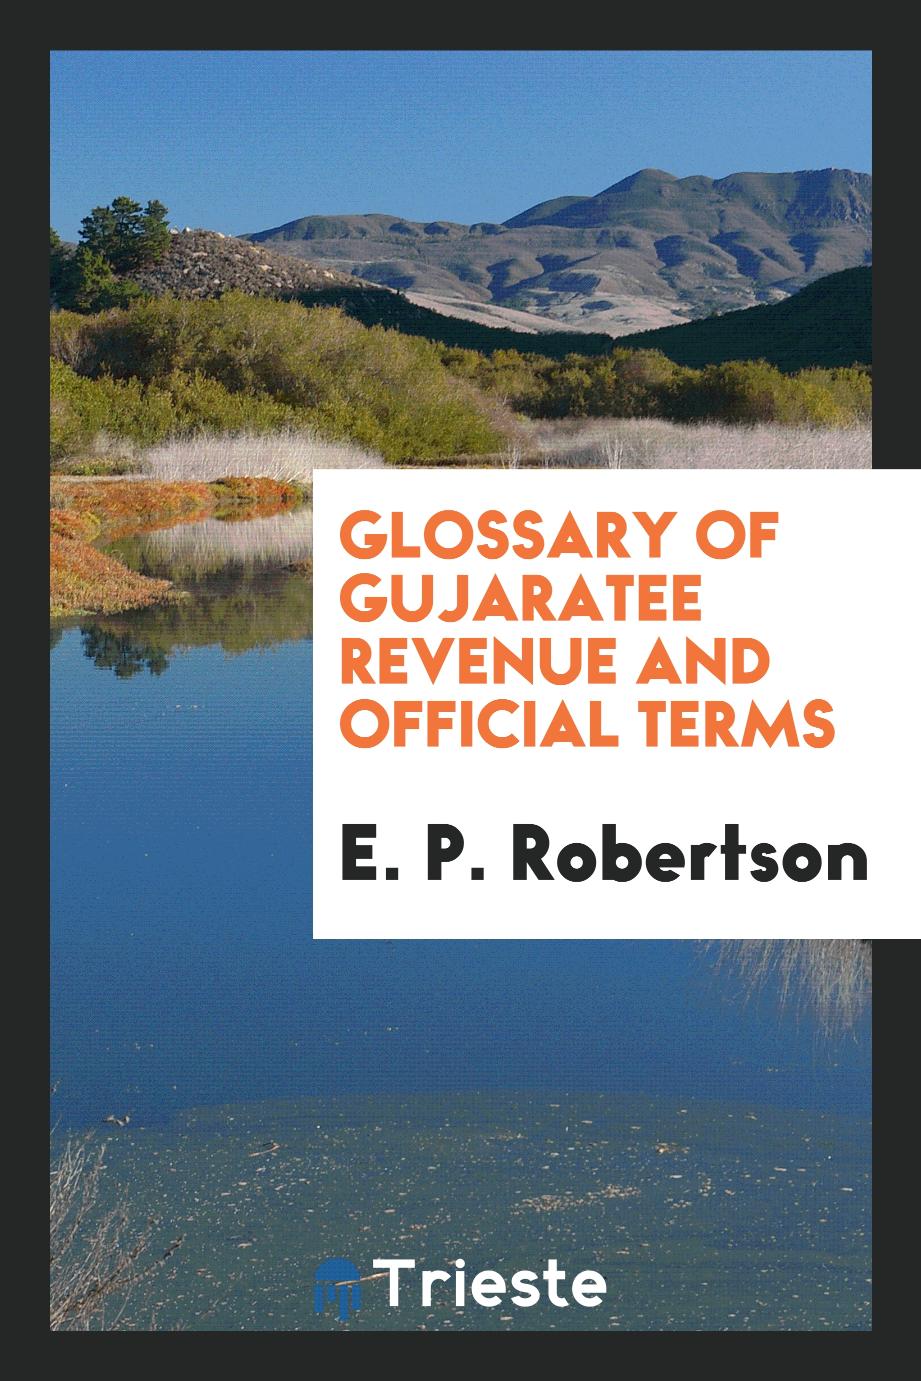 Glossary of Gujaratee revenue and official terms